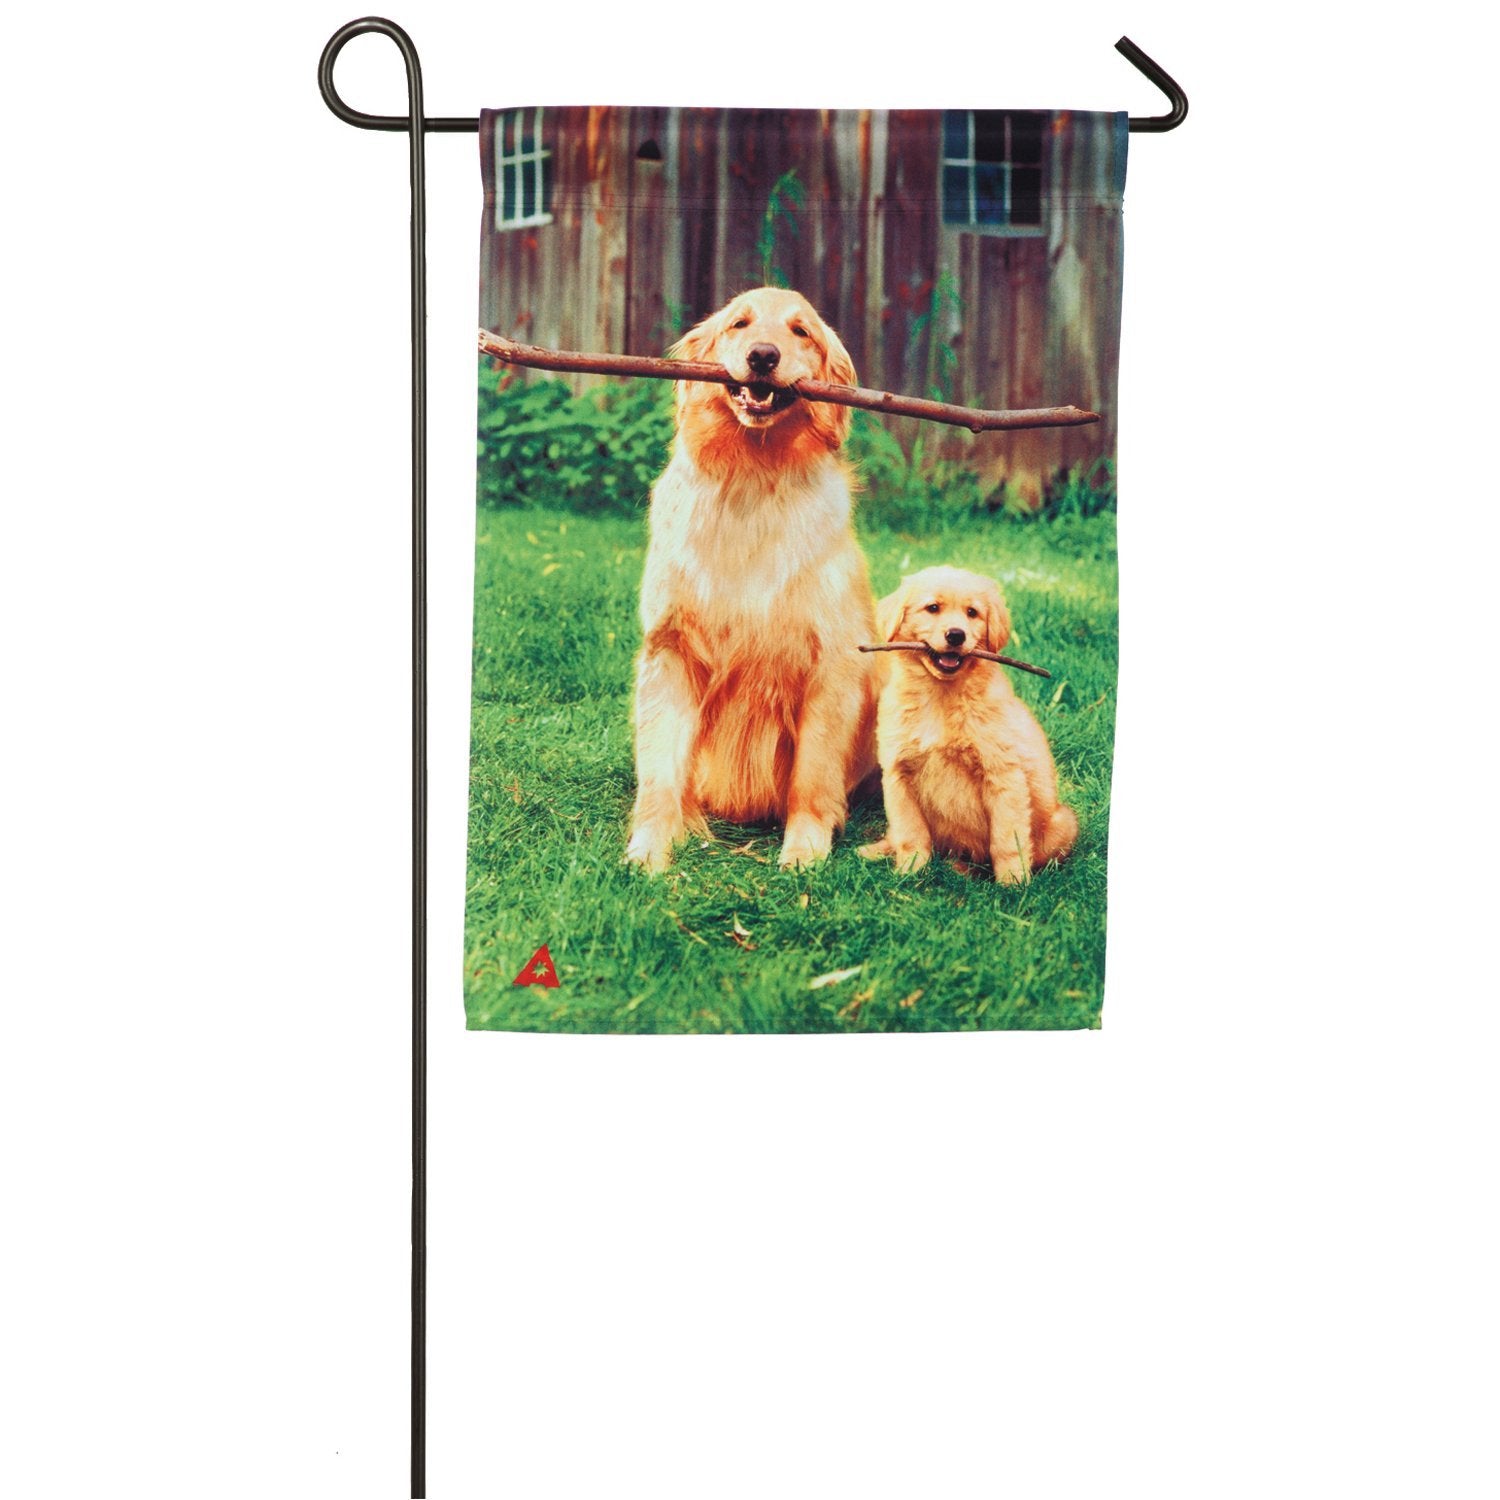 Big and Little Dog with Sticks Garden Flag, #14a4729